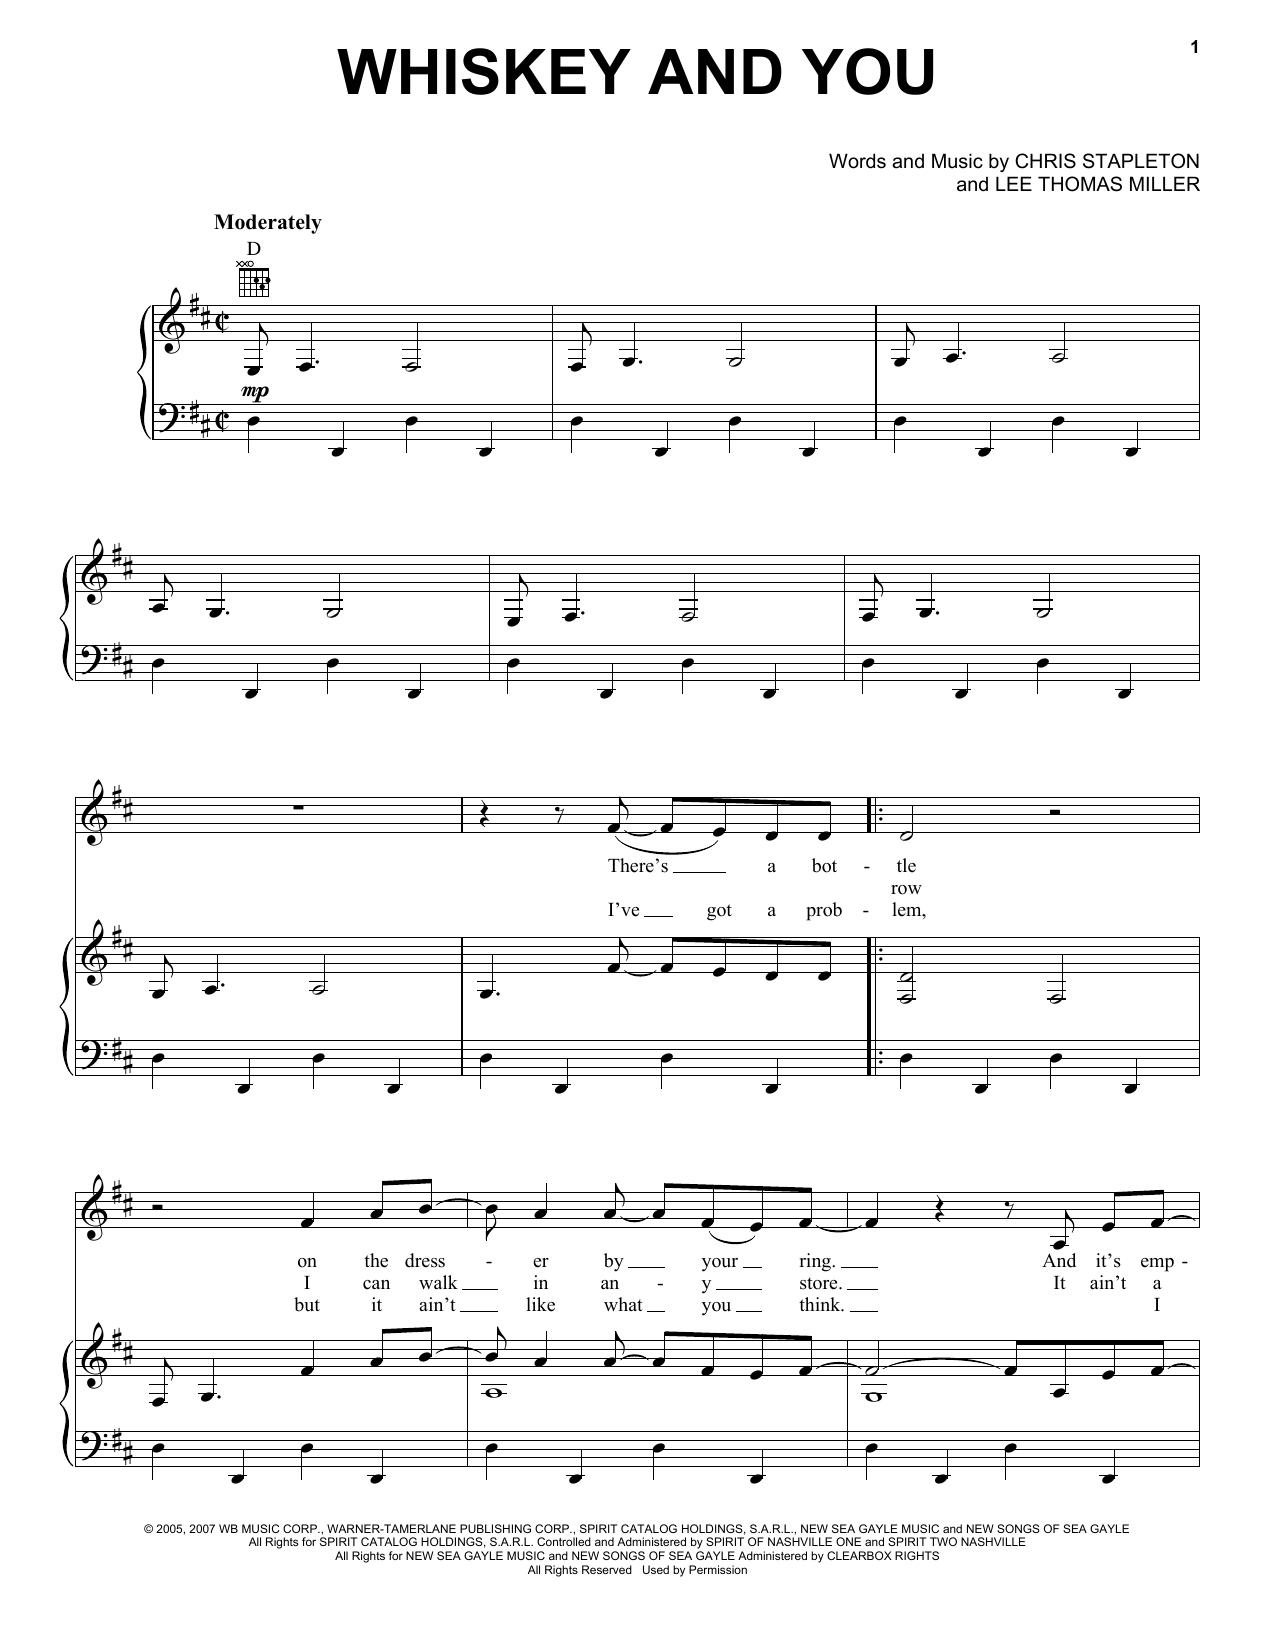 Chris Stapleton Chords Chris Stapleton Whiskey And You Sheet Music Notes Chords Download Printable Piano Vocal Guitar Right Hand Melody Sku 361618